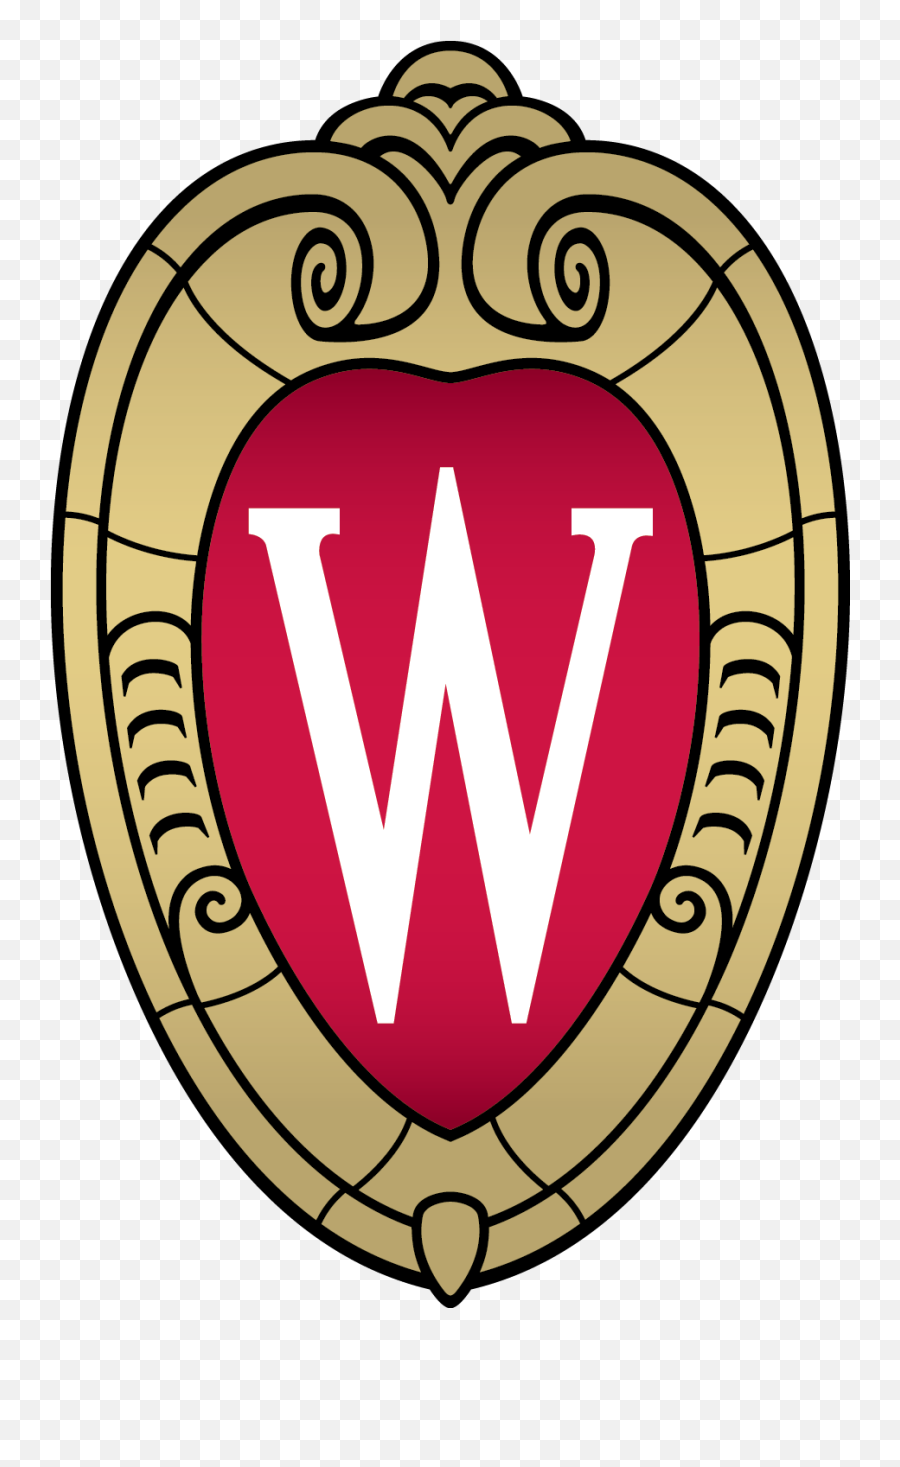 Wisconsin Logos - University Of Wisconsin Logo Png,Brewers Packers Badgers Logo